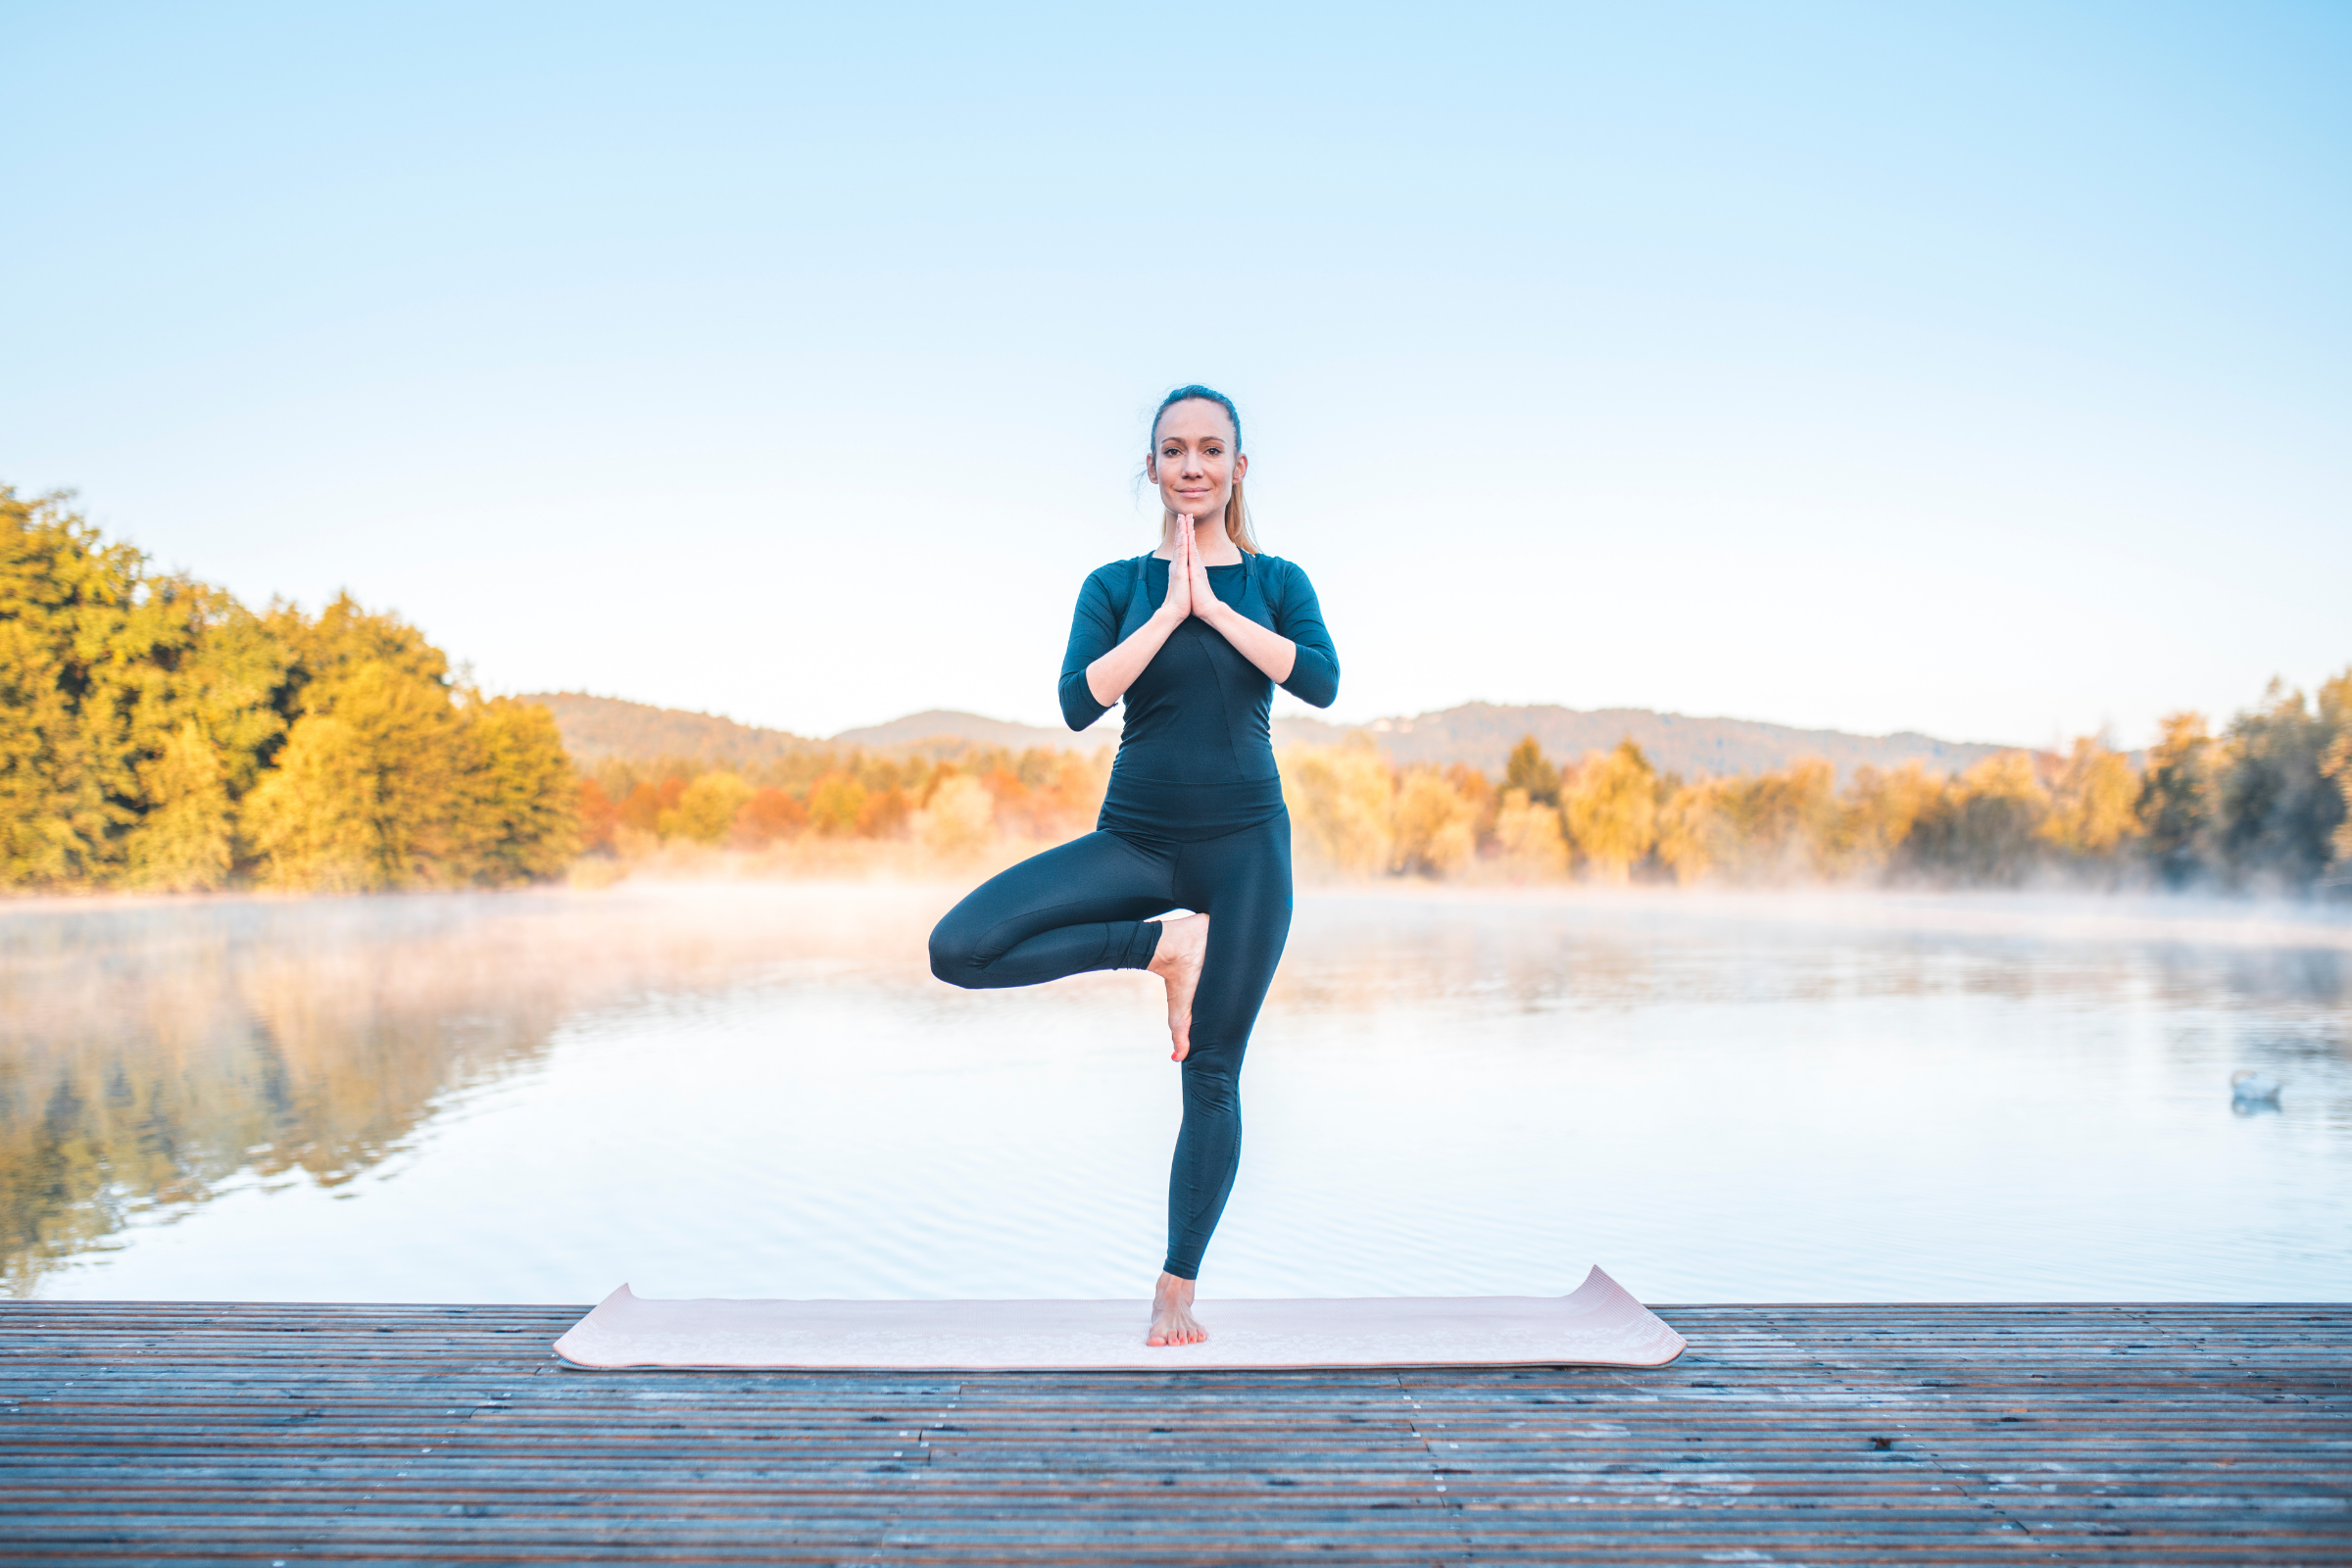 blonde woman with ponytail wearing all black standing on wooden dock in tree yoga pose